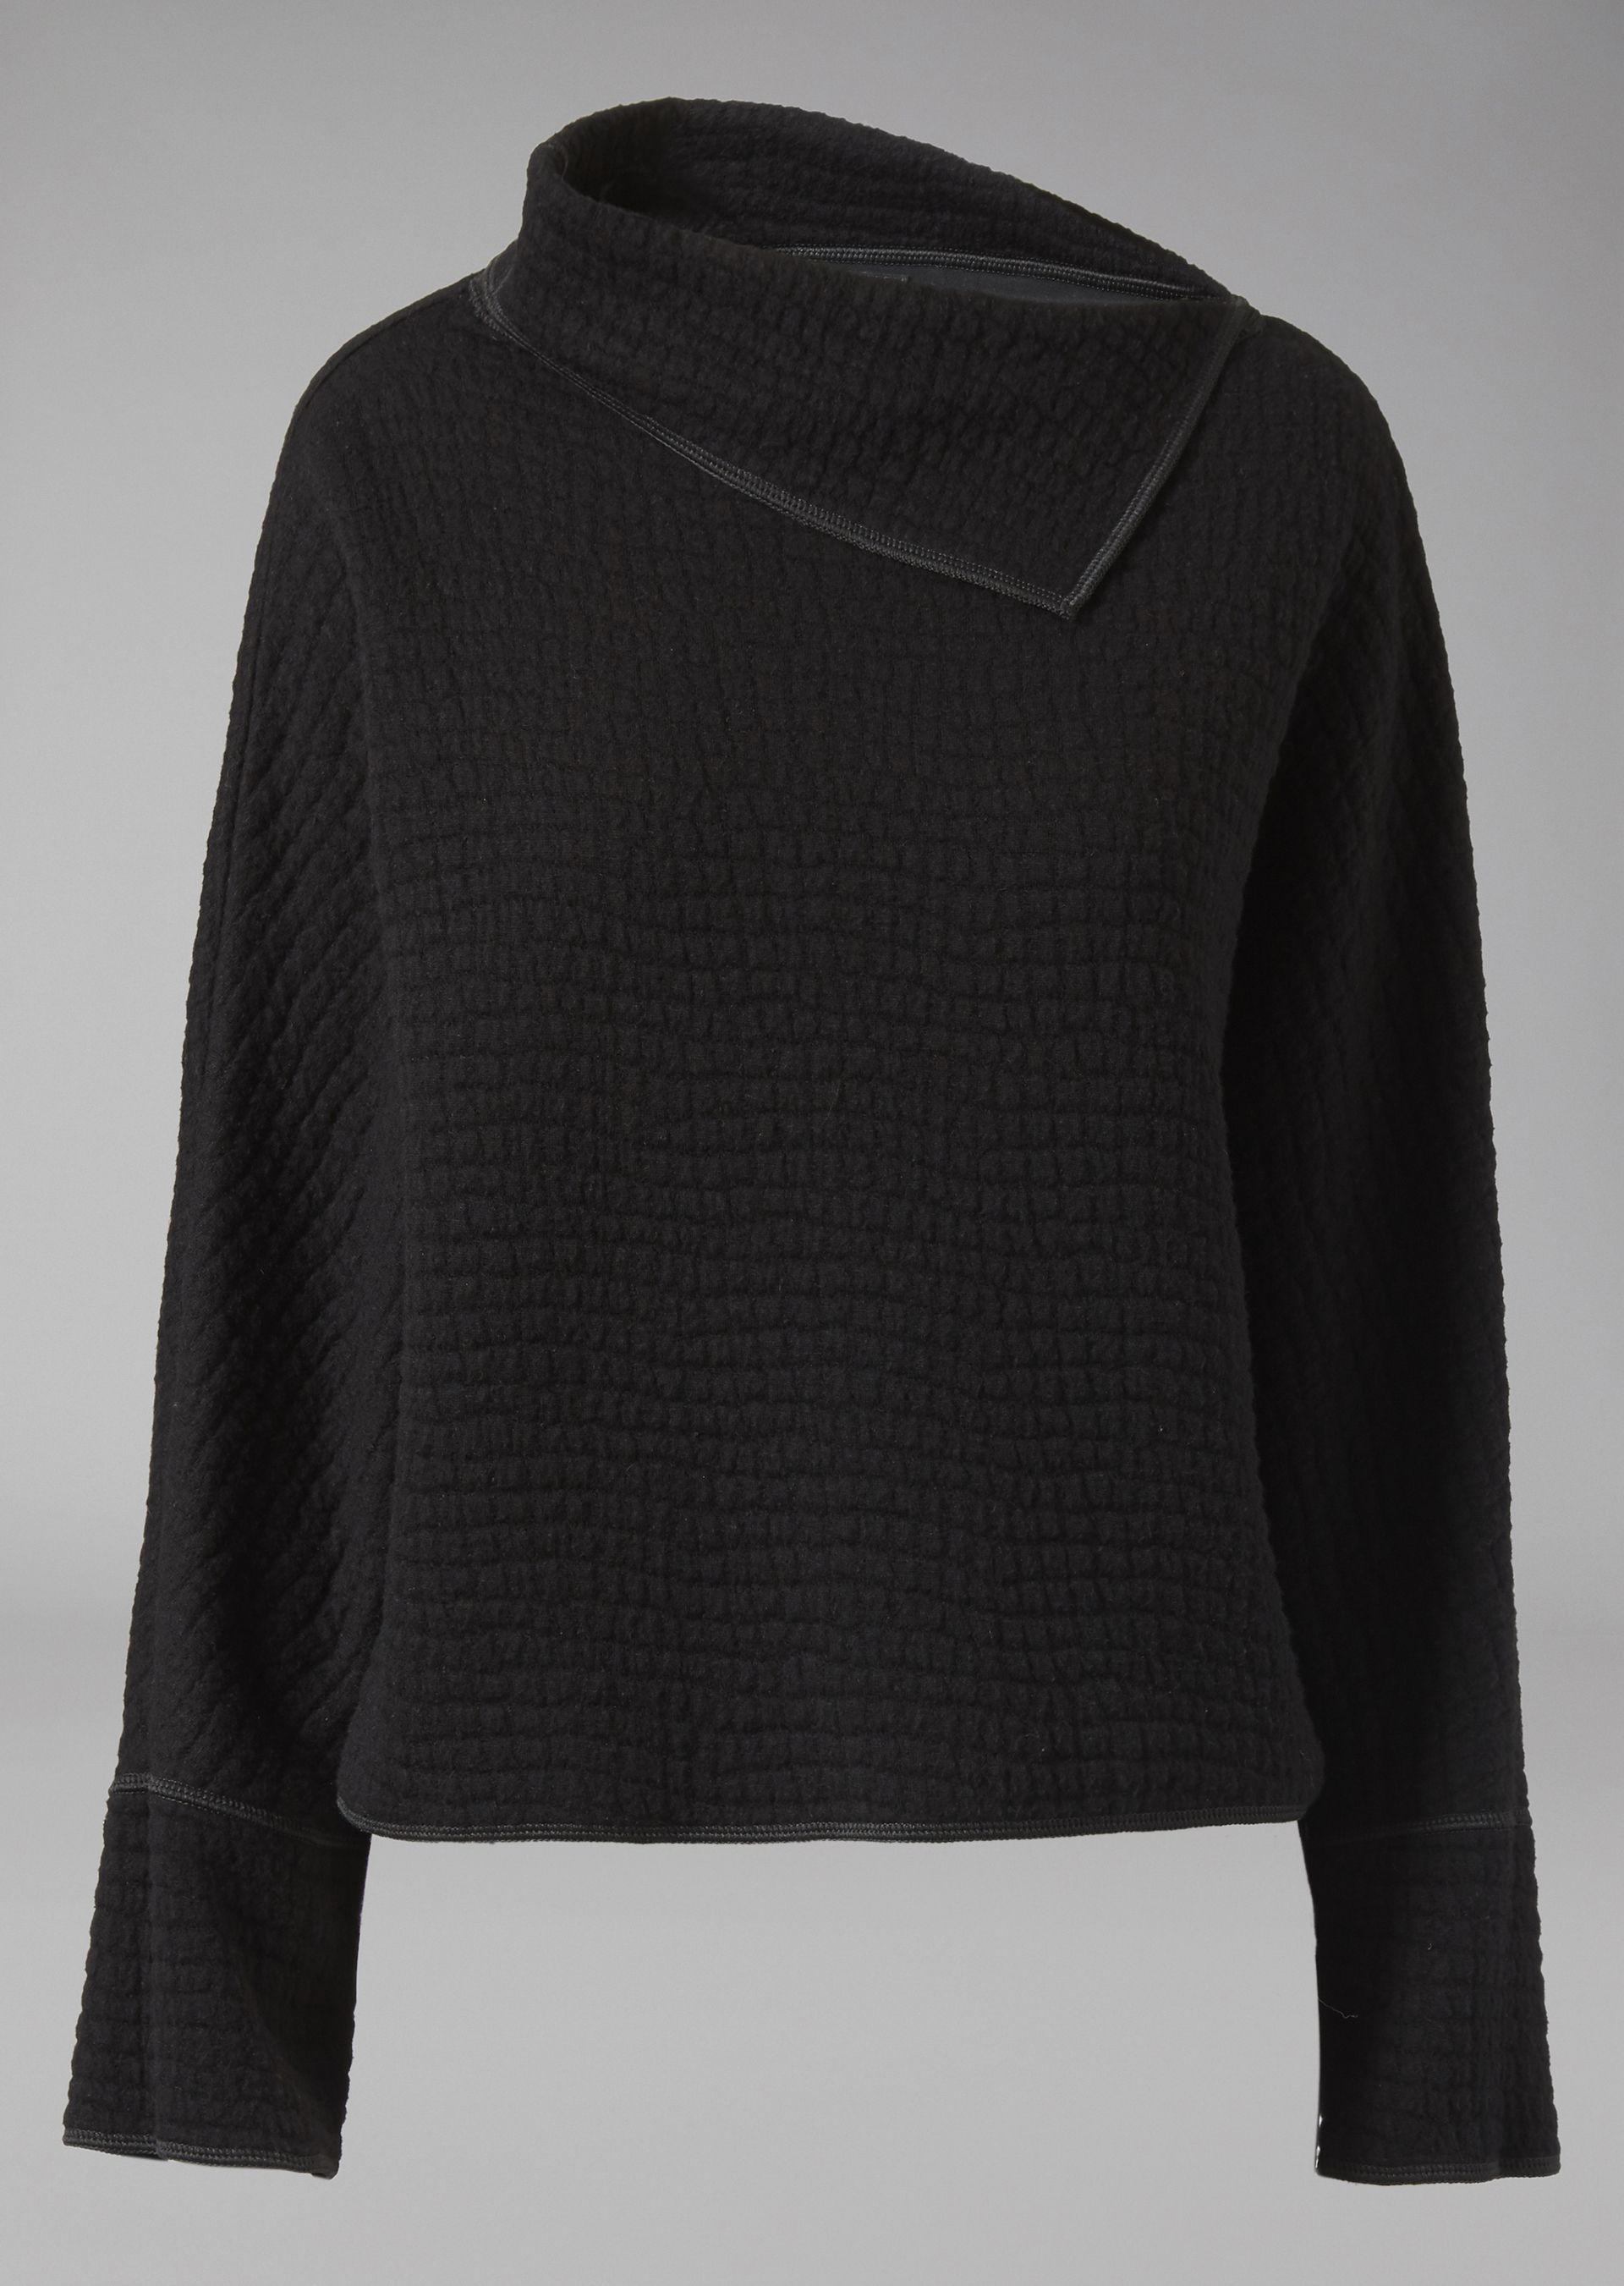 Fall Sweaters: Finding the Perfect Look for a Night on the Town Giorgio Armani